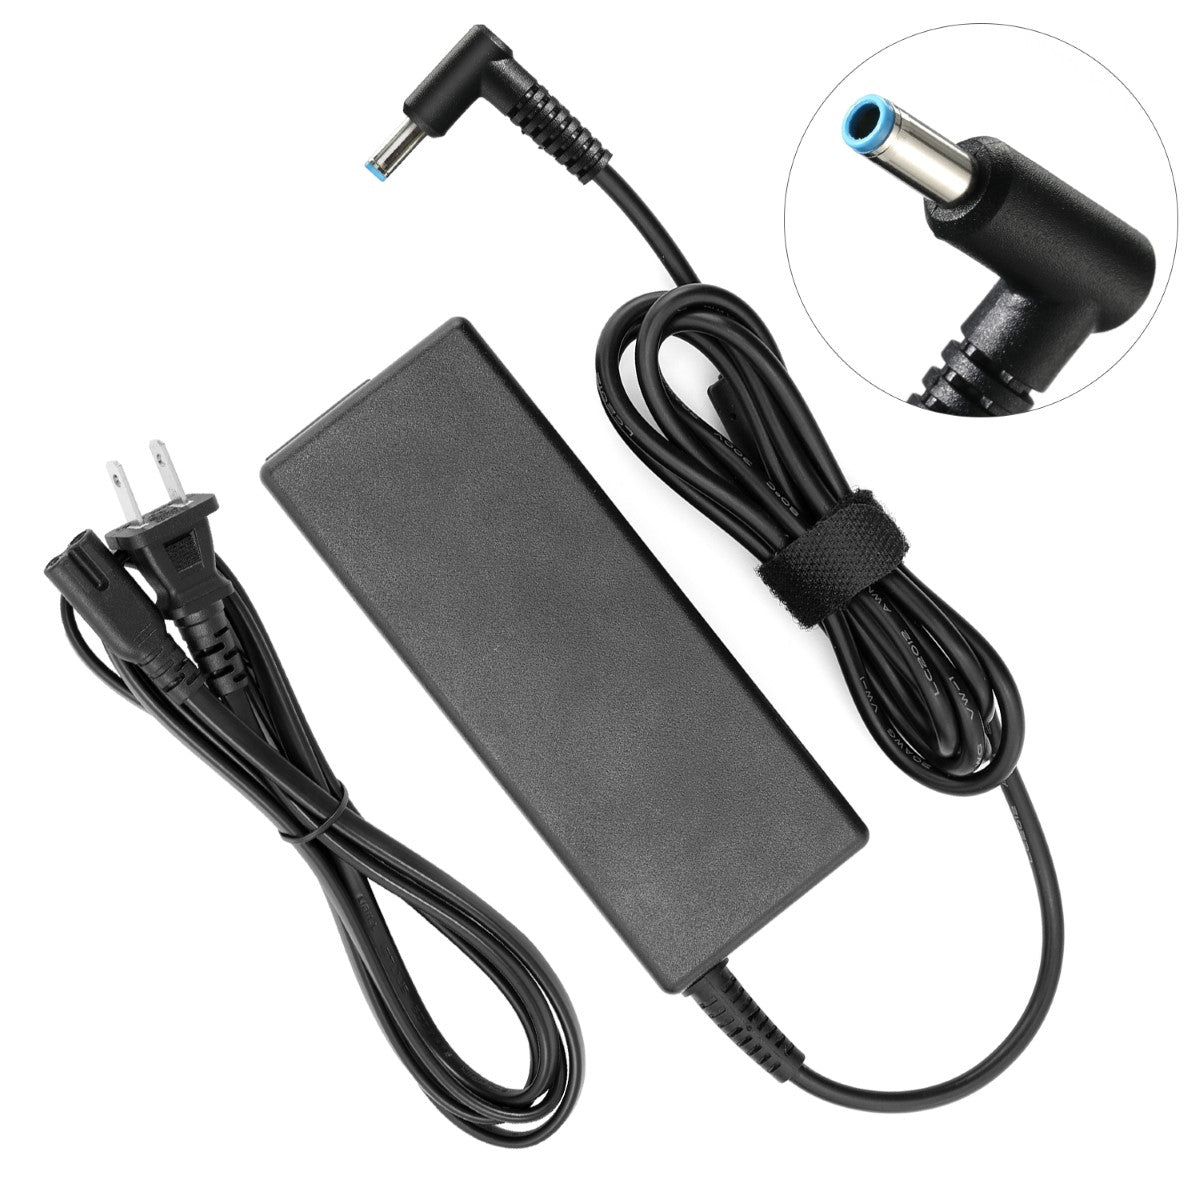 AC Adapter Charger for hp Envy Touchsmart 15-k177nr Notebook.